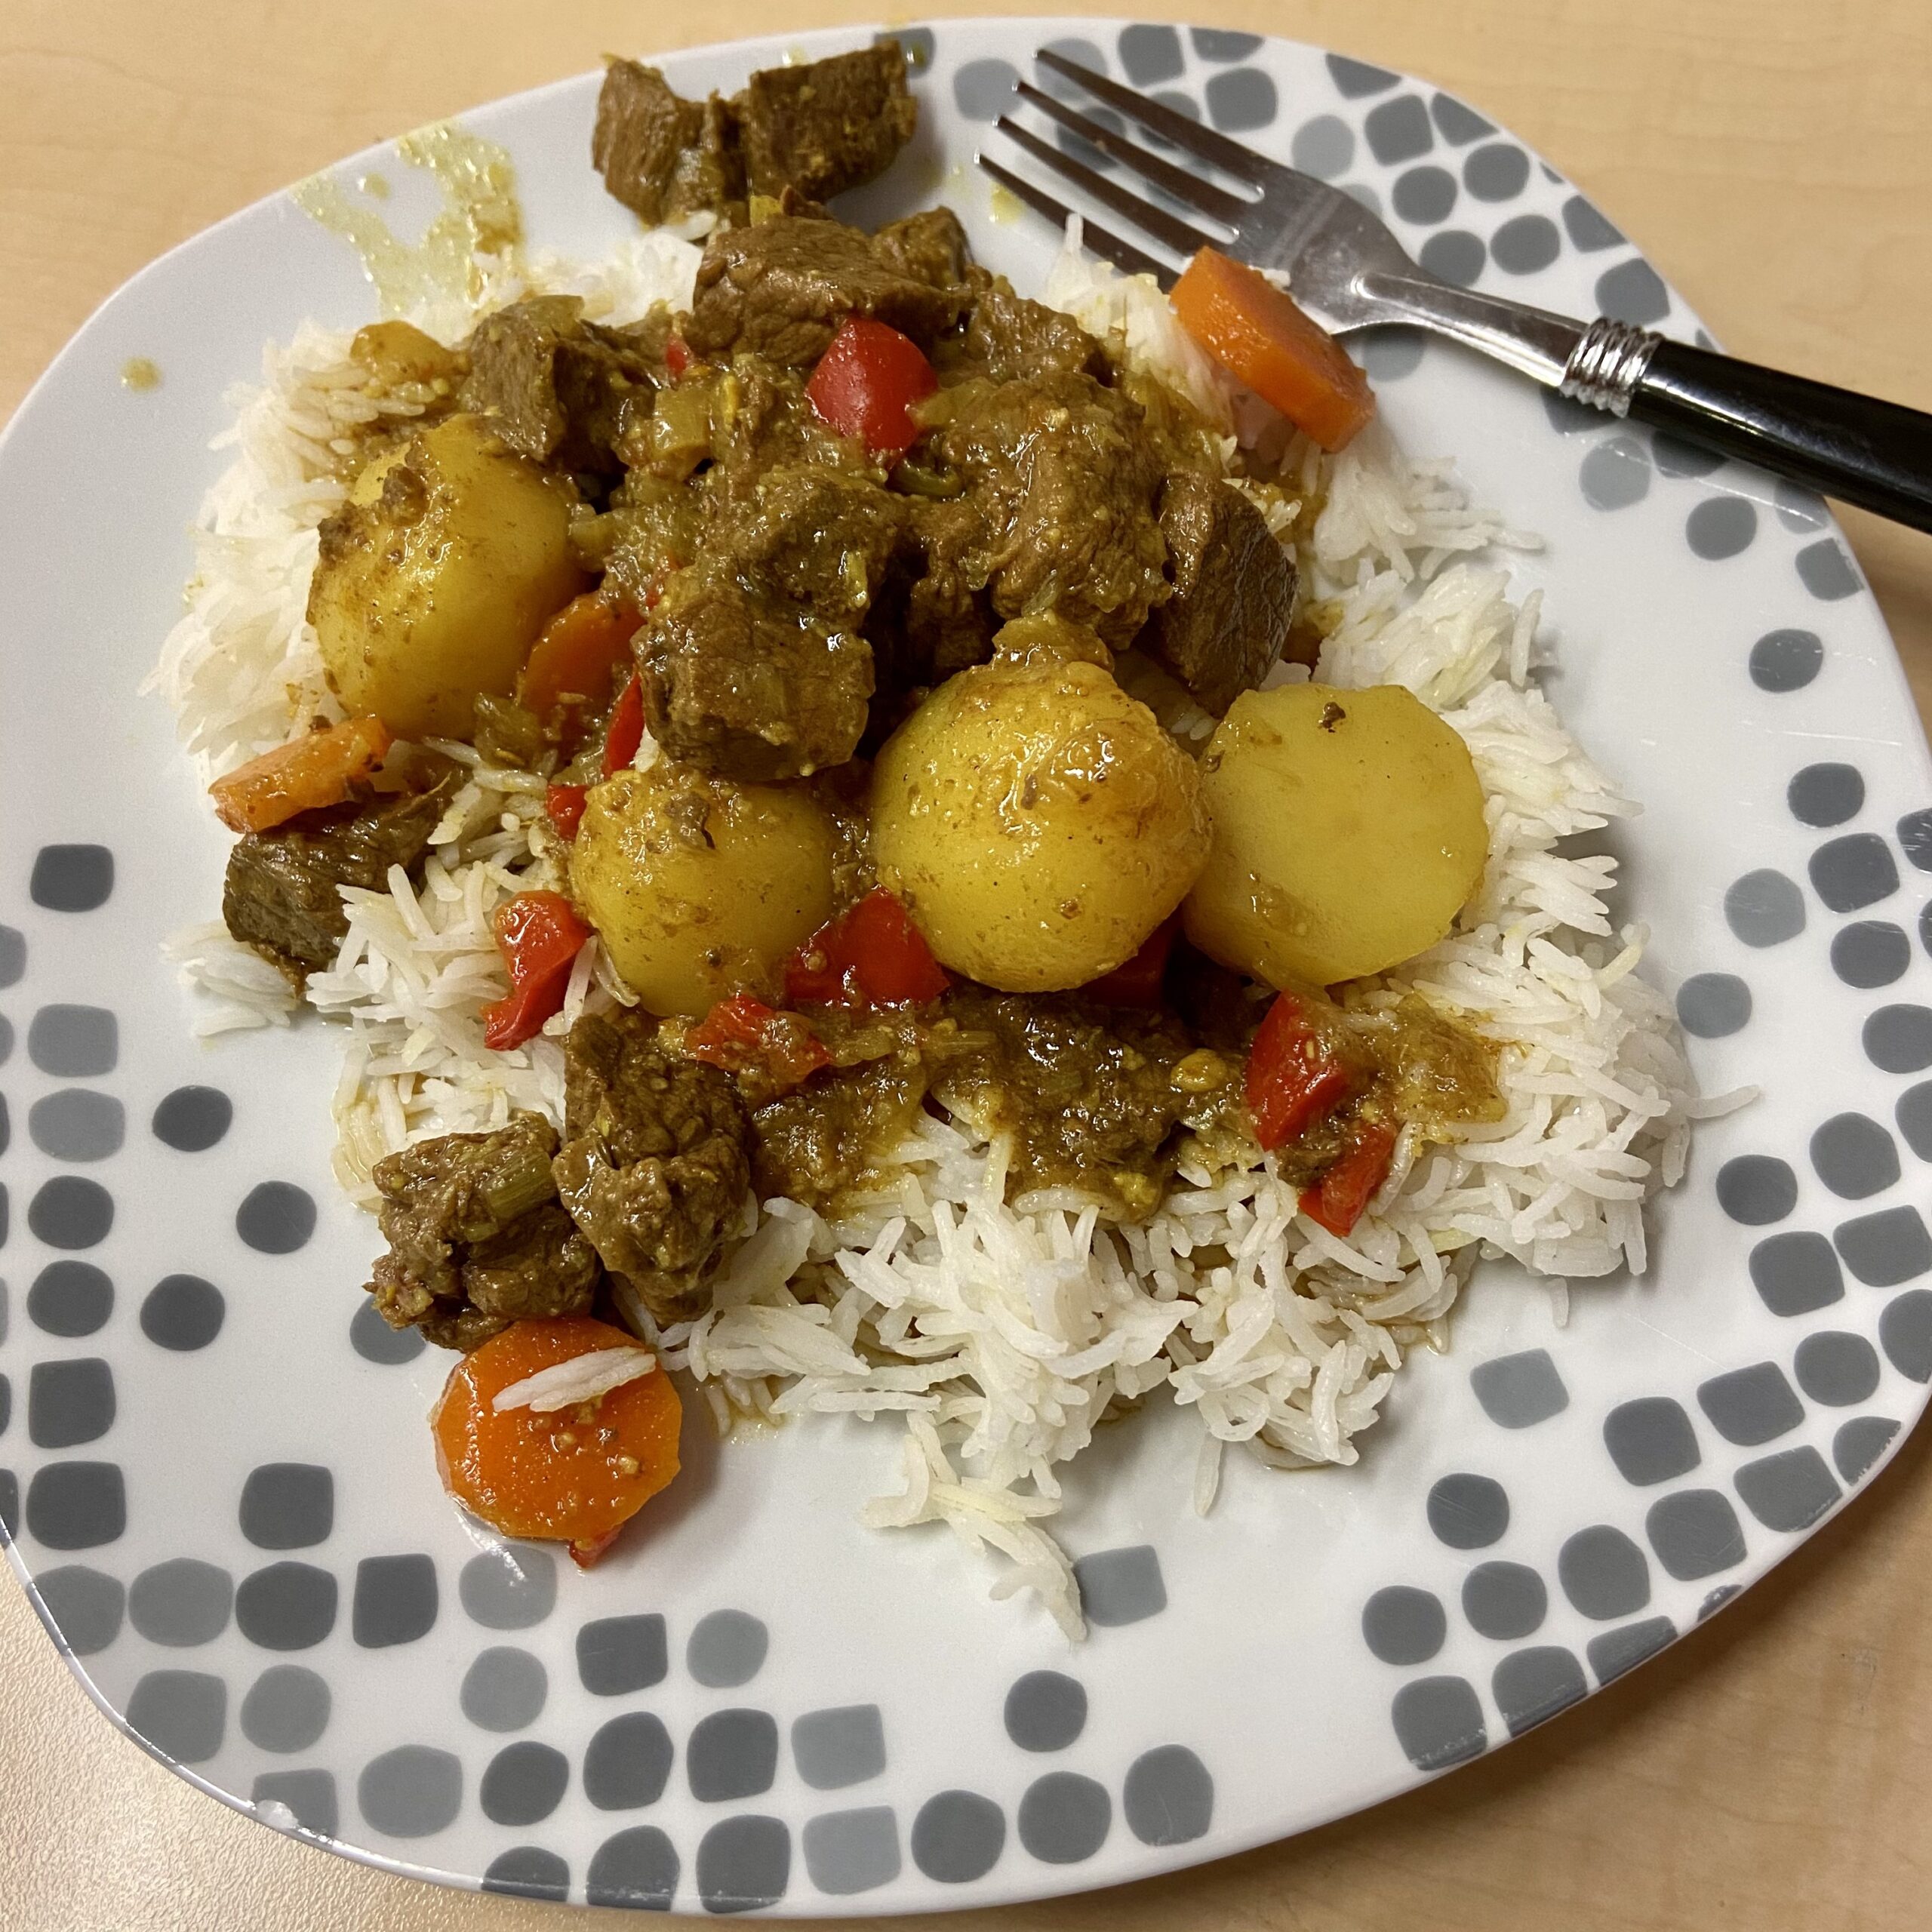 http://www.coachray.nz/wp-content/uploads/2021/01/Mild-Beef-Curry-scaled.jpg